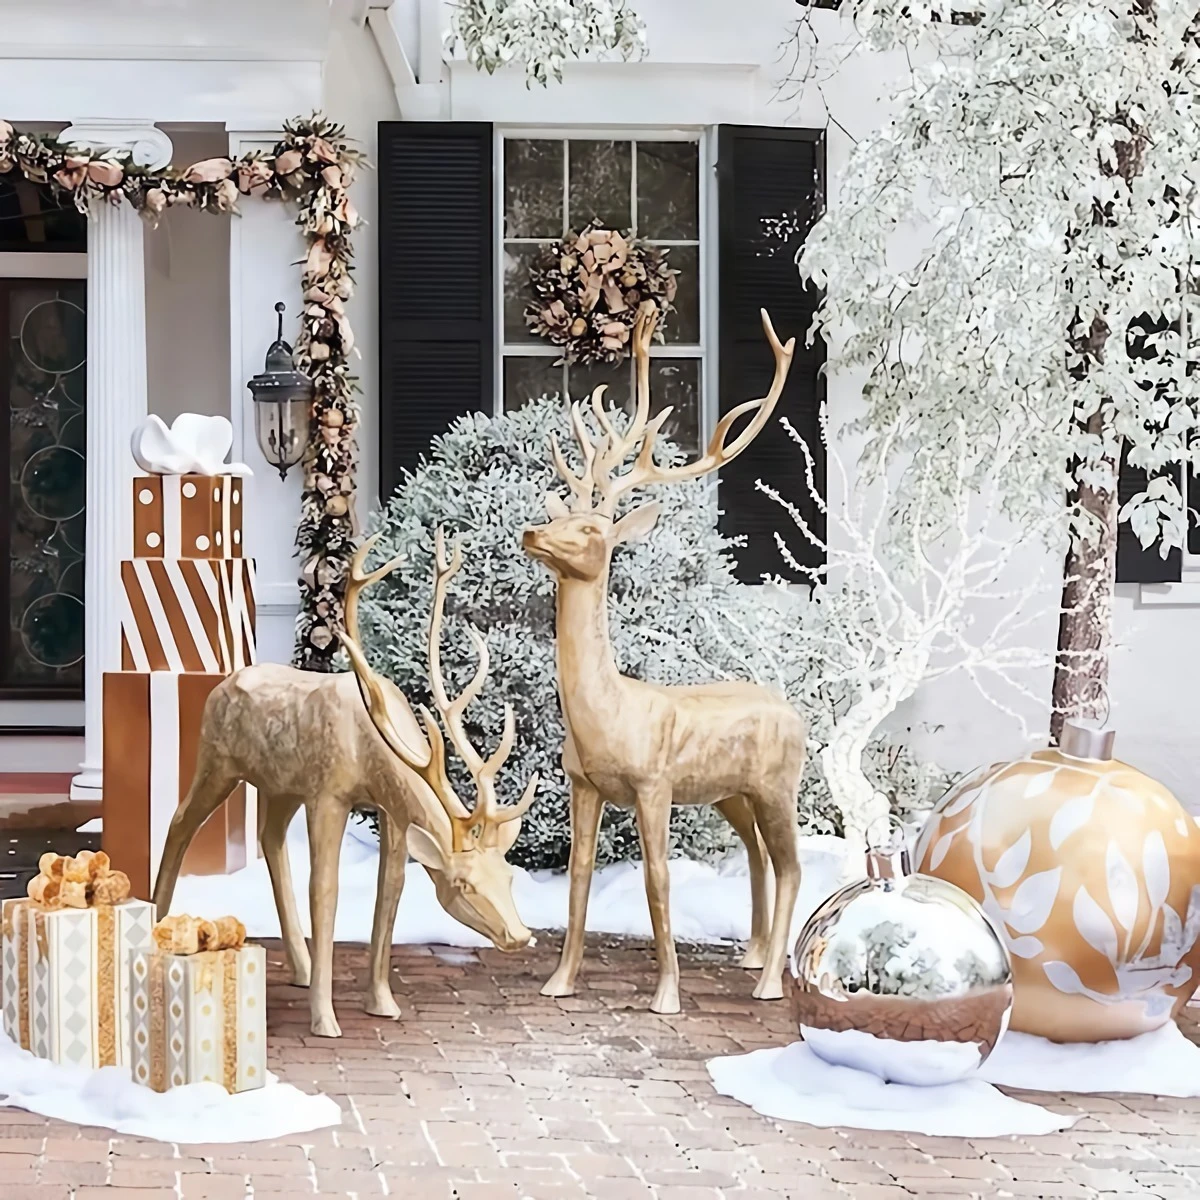 golden deer oversized wrapped gifts ornaments outdoor best christmas decorations ideas